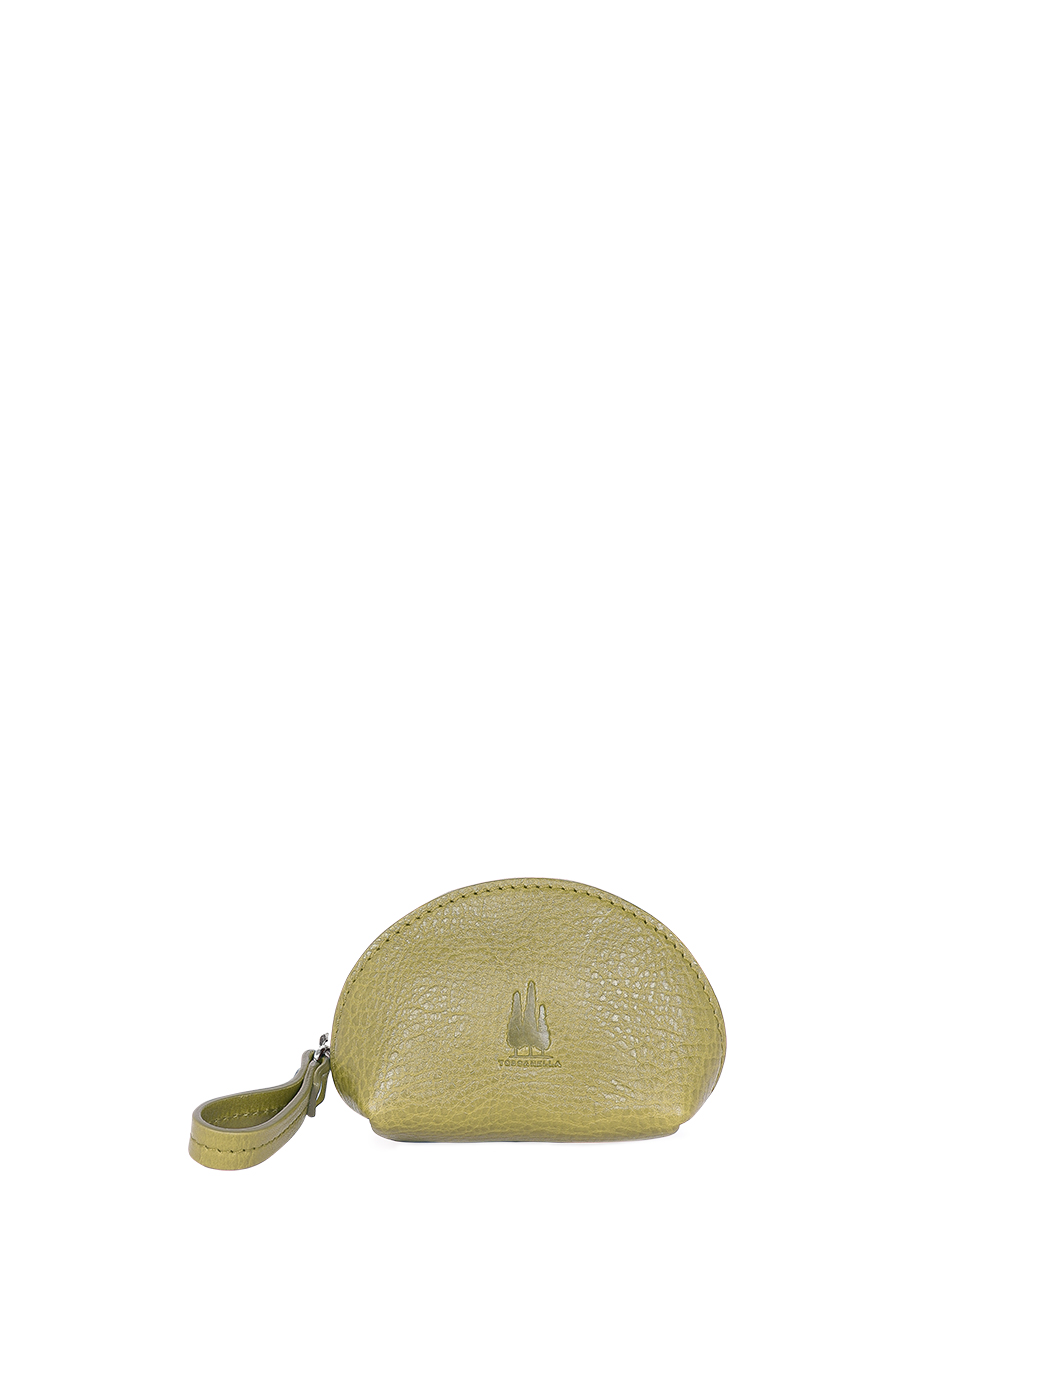 Women's Small Clam Shell Pouch in Leather Olive green